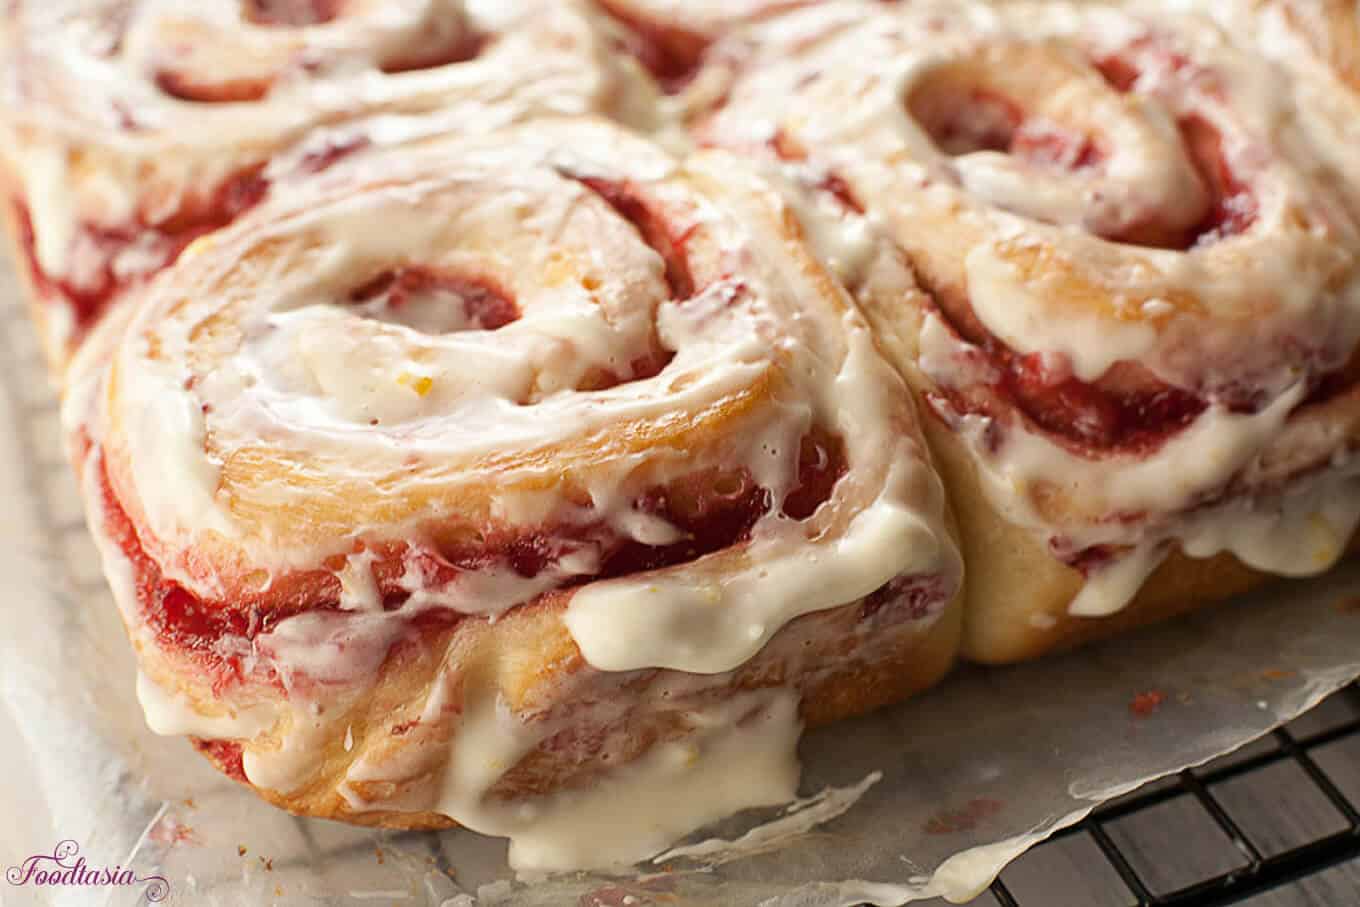 A soft, tender roll enveloping a sweet and tangy fresh strawberry swirl, topped with a cream cheese glaze with a hint of lemony citrus. Fresh Strawberry Sweet Rolls with a Lemony Cream Cheese Glaze make a delightful breakfast.